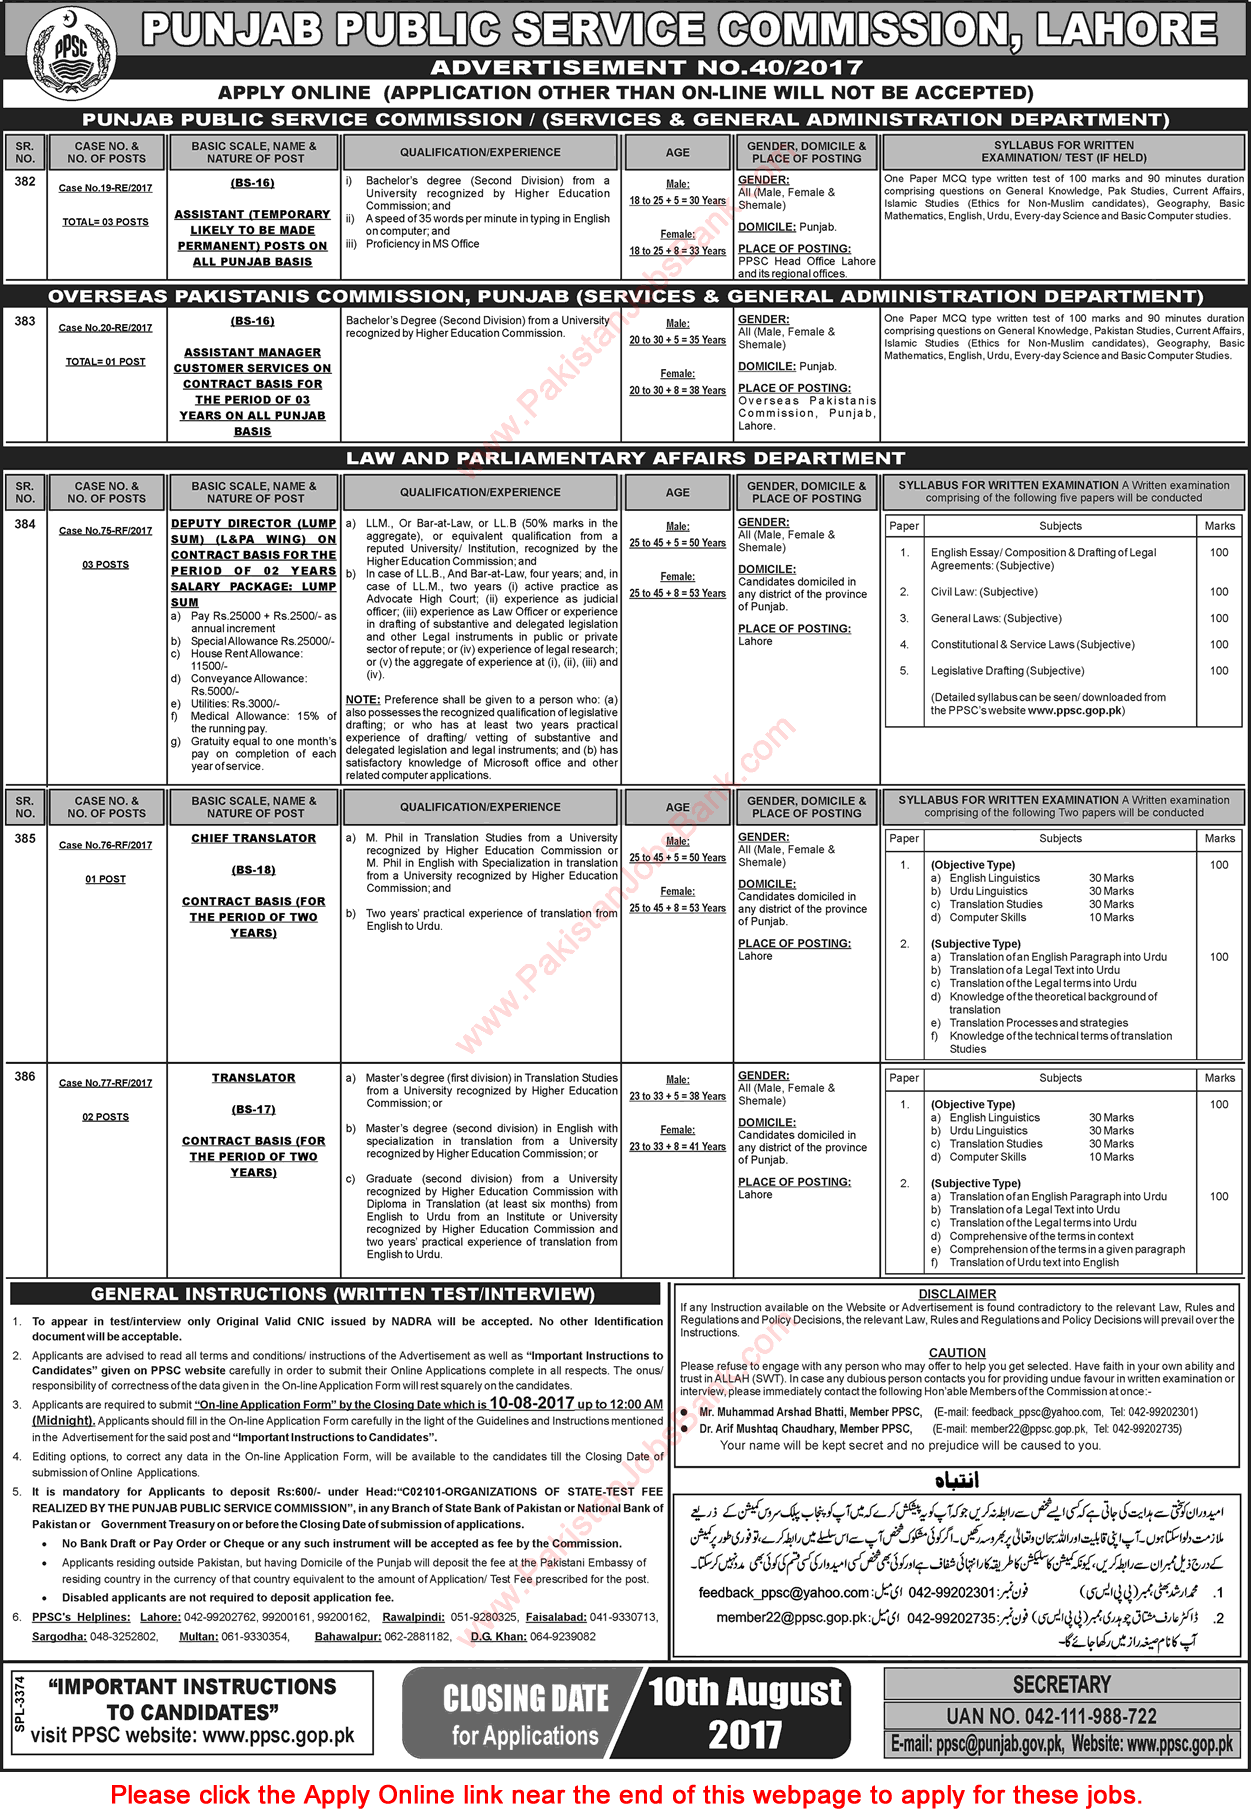 PPSC Jobs July 2017 Apply Online Consolidated Advertisement No 40/2017 Latest